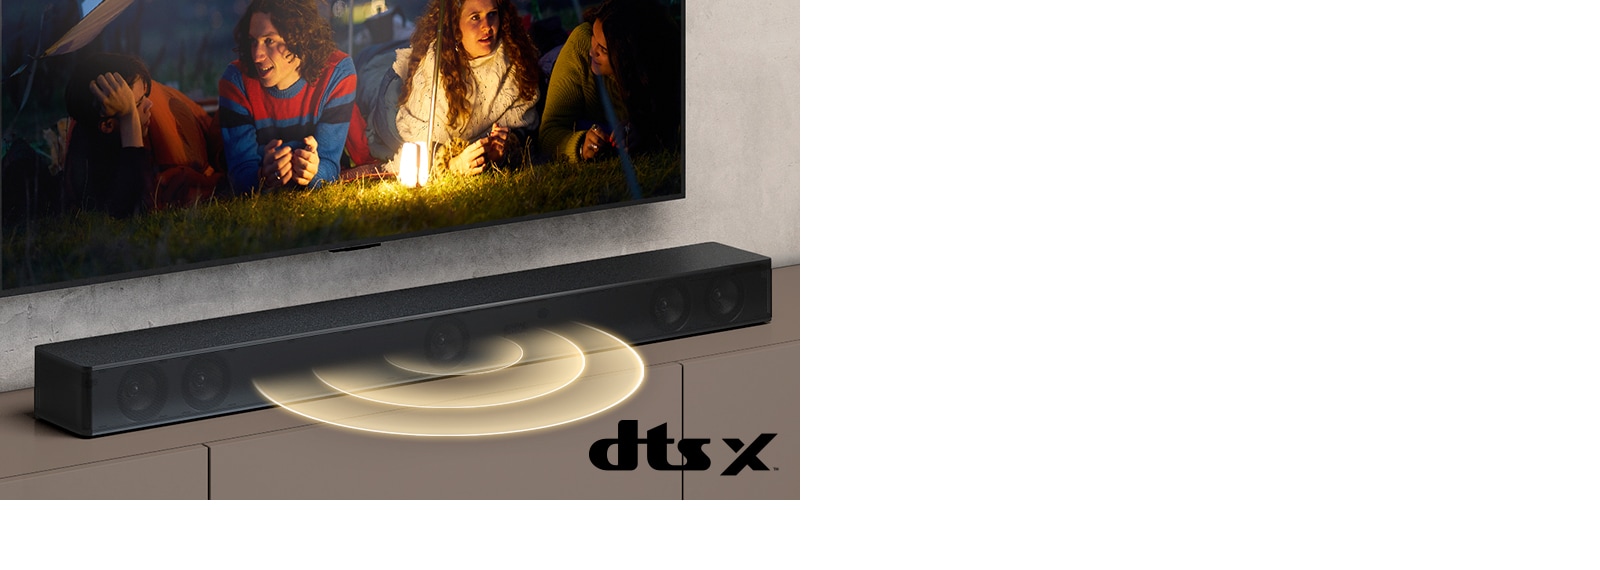 LG TV is on the wall, on the screen it shows 2 couples lying on the grass. In front of them, there is a lamp. LG Sound bar is below LG TV. Sound graphic is coming out from the front of the sound bar. DTS Virtual:X logo is shown on the bottom right corner of image.